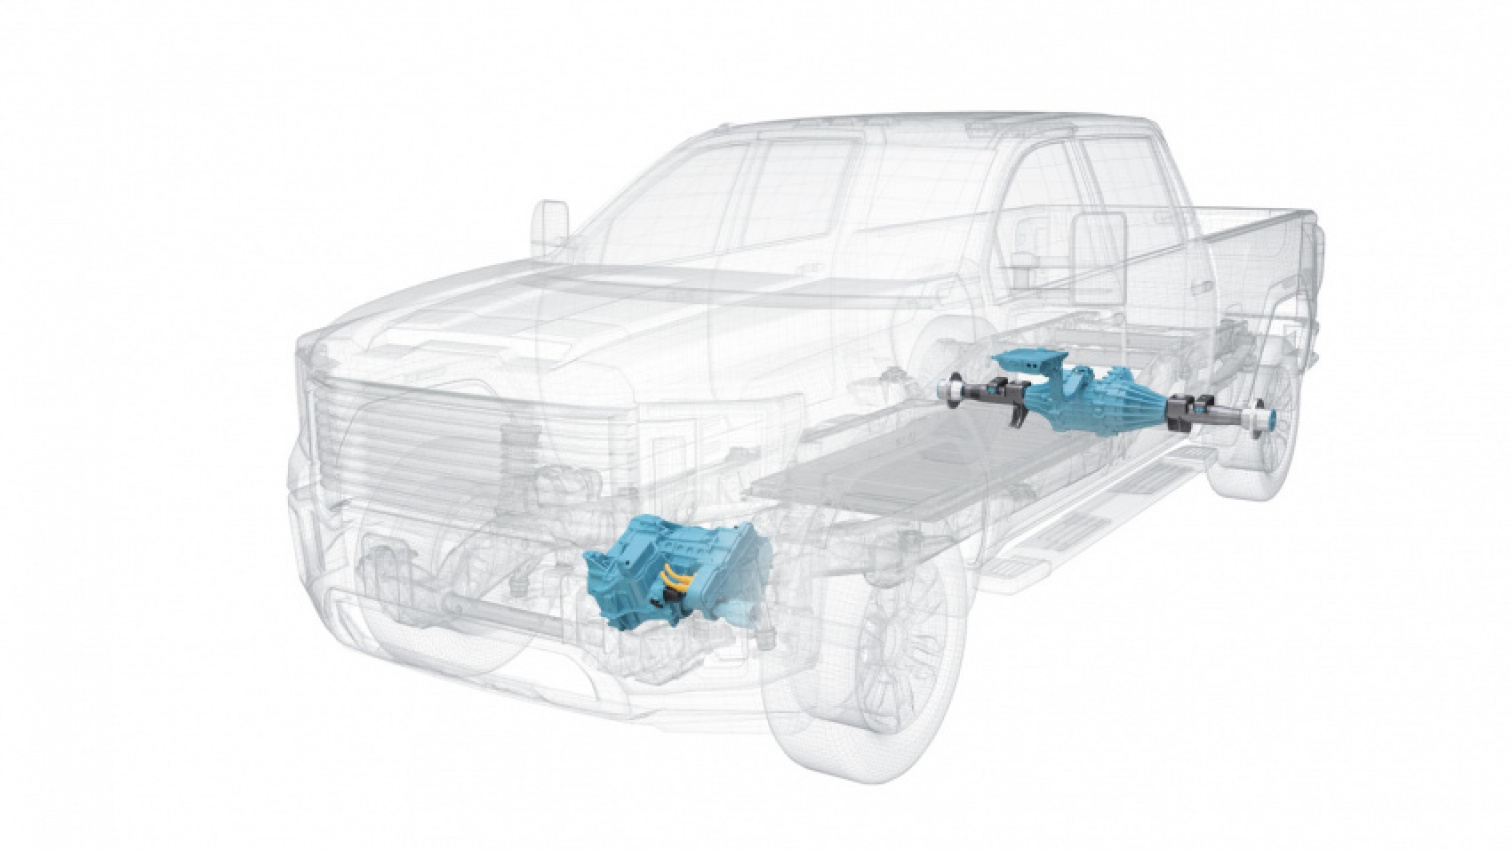 autos, cars, reviews, etelligence quotient: driving the future heavy-duty electric pickup trucks